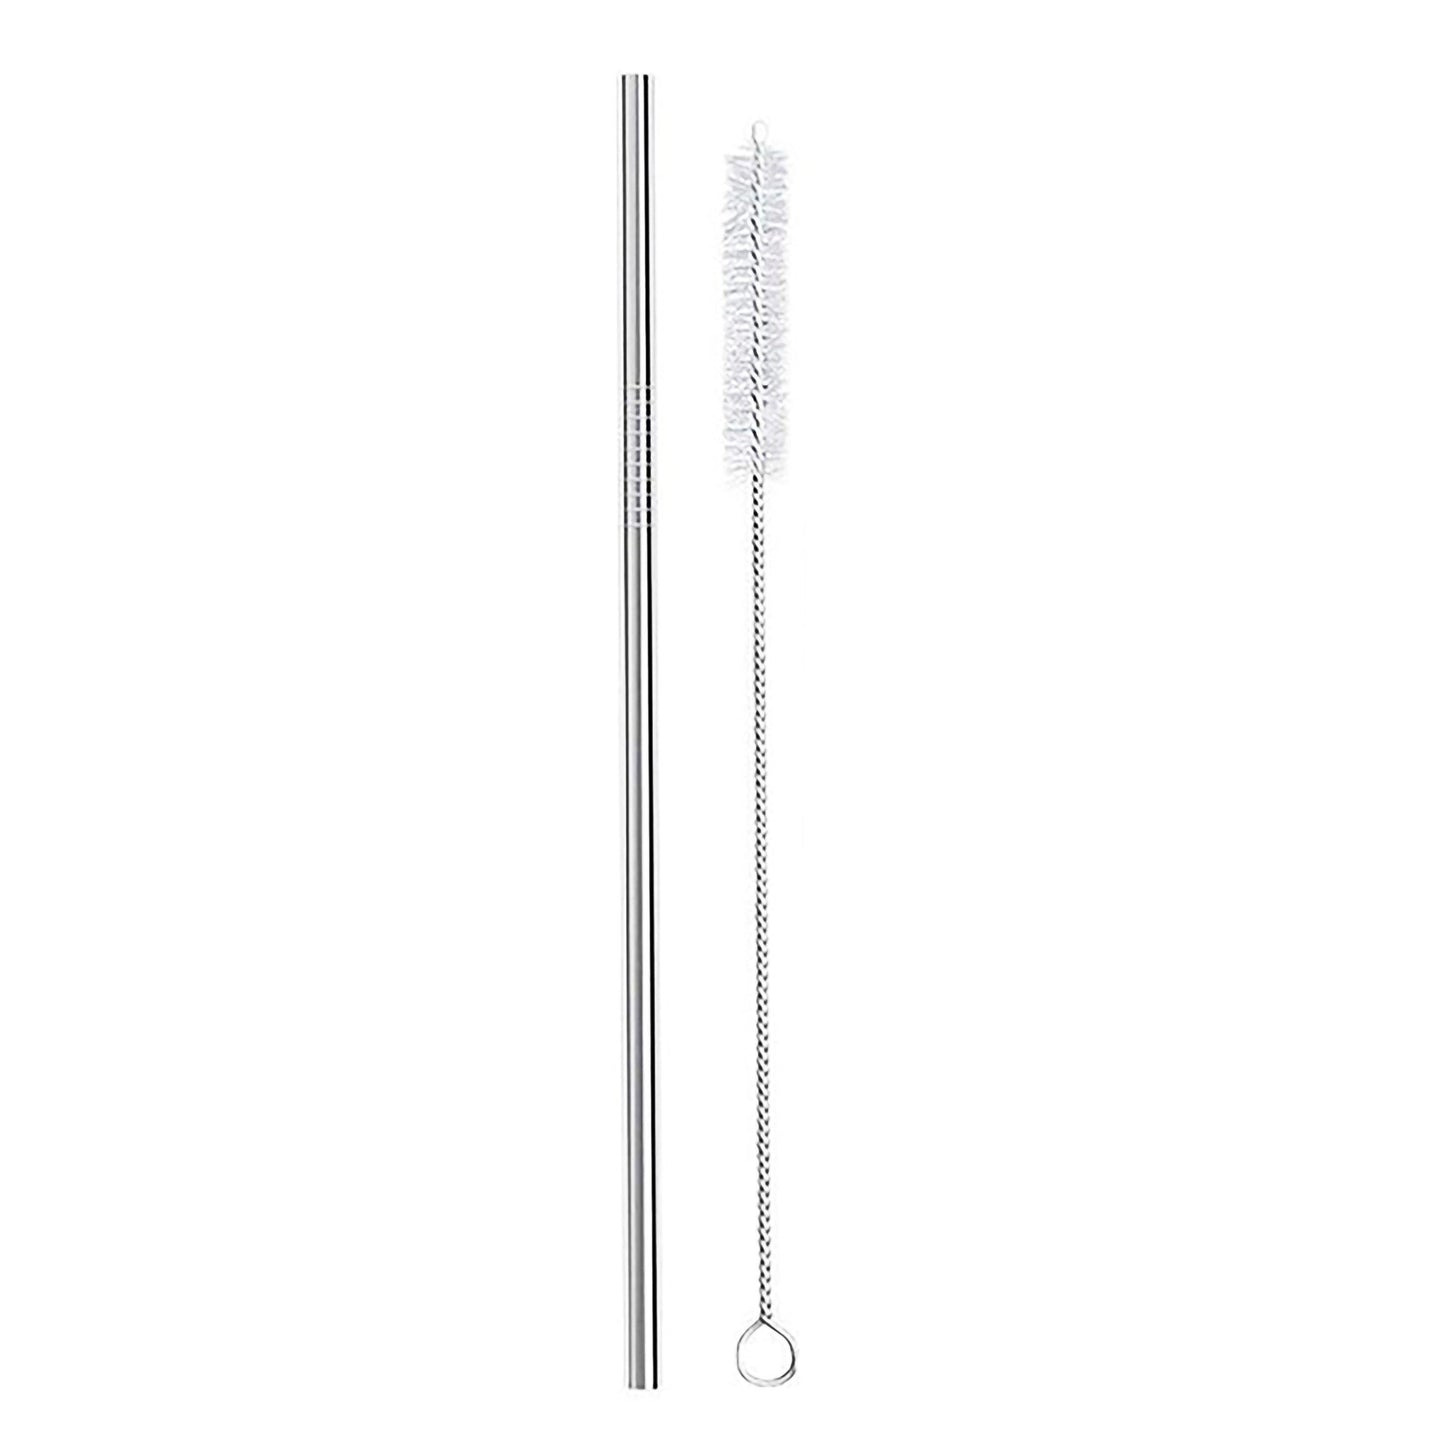 Smoothie Straw Pack with Vegan Cleaning Brush - Meals In Steel 